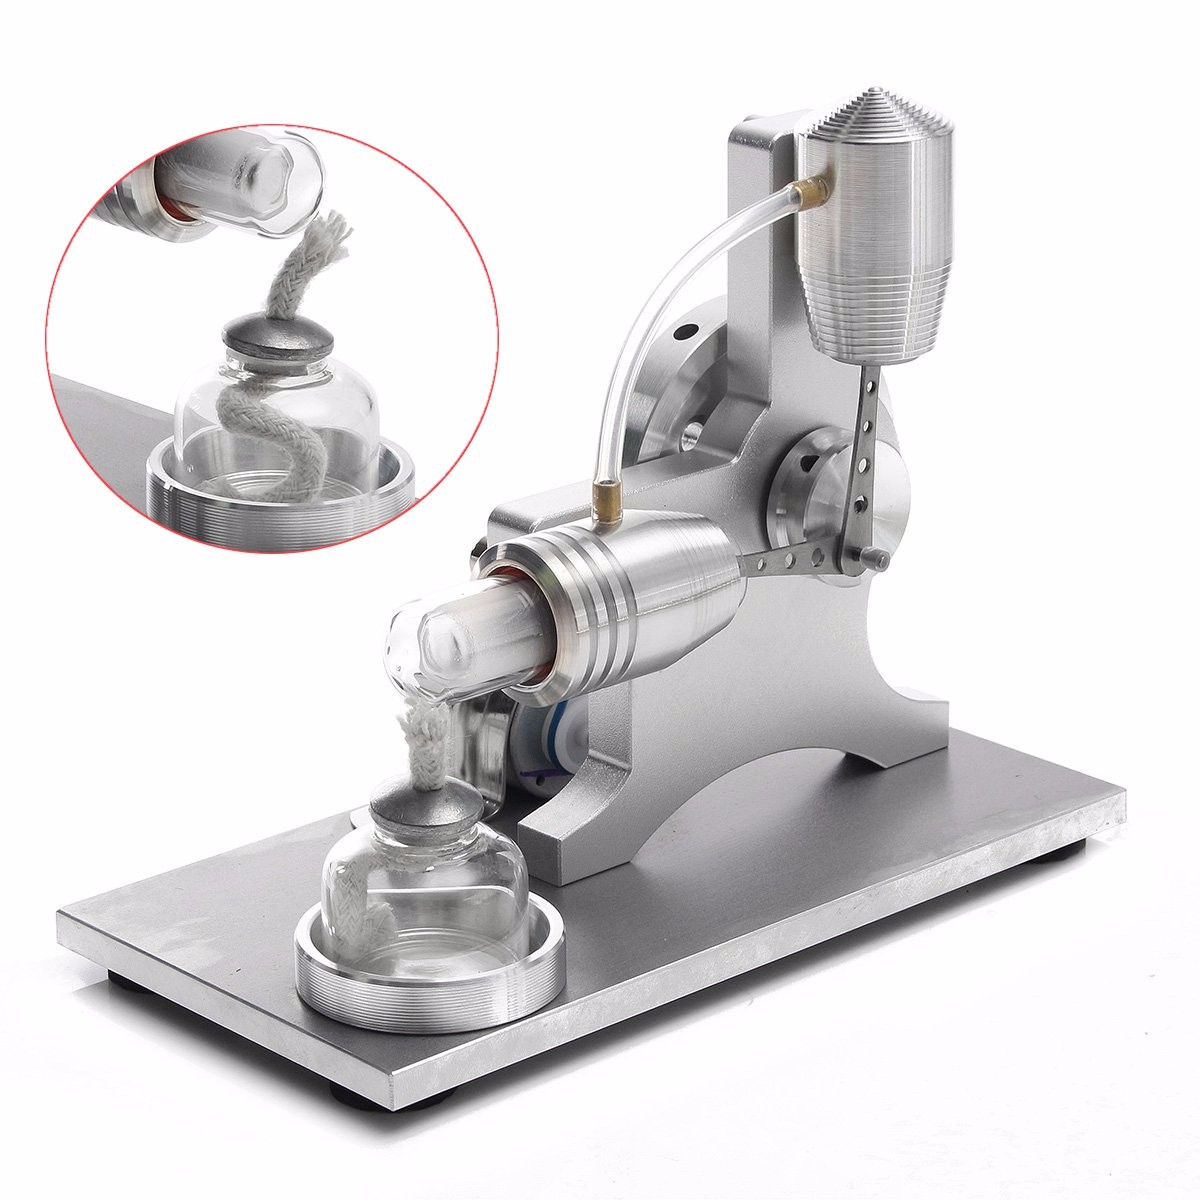 Stirling-Engine-Model-Physical-Motor-Power-Generator-External-Combustion-Educational-Toy-1107075